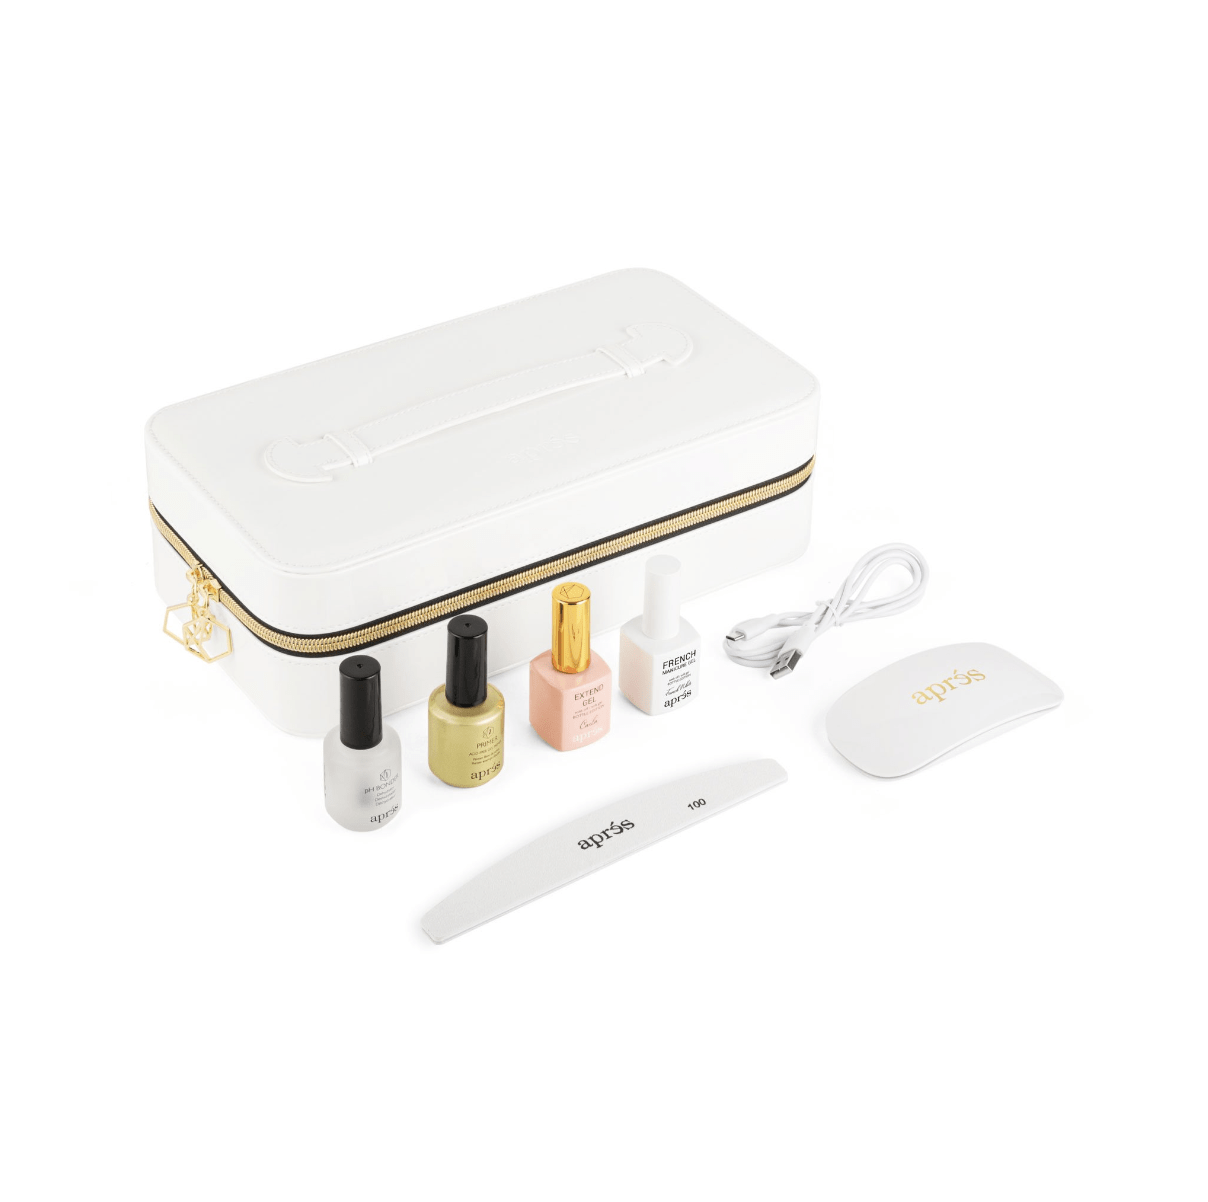 Apres Gel X™ French Manicure Nail Extension Kit (TIP BOX IS NOT INCLUDED)